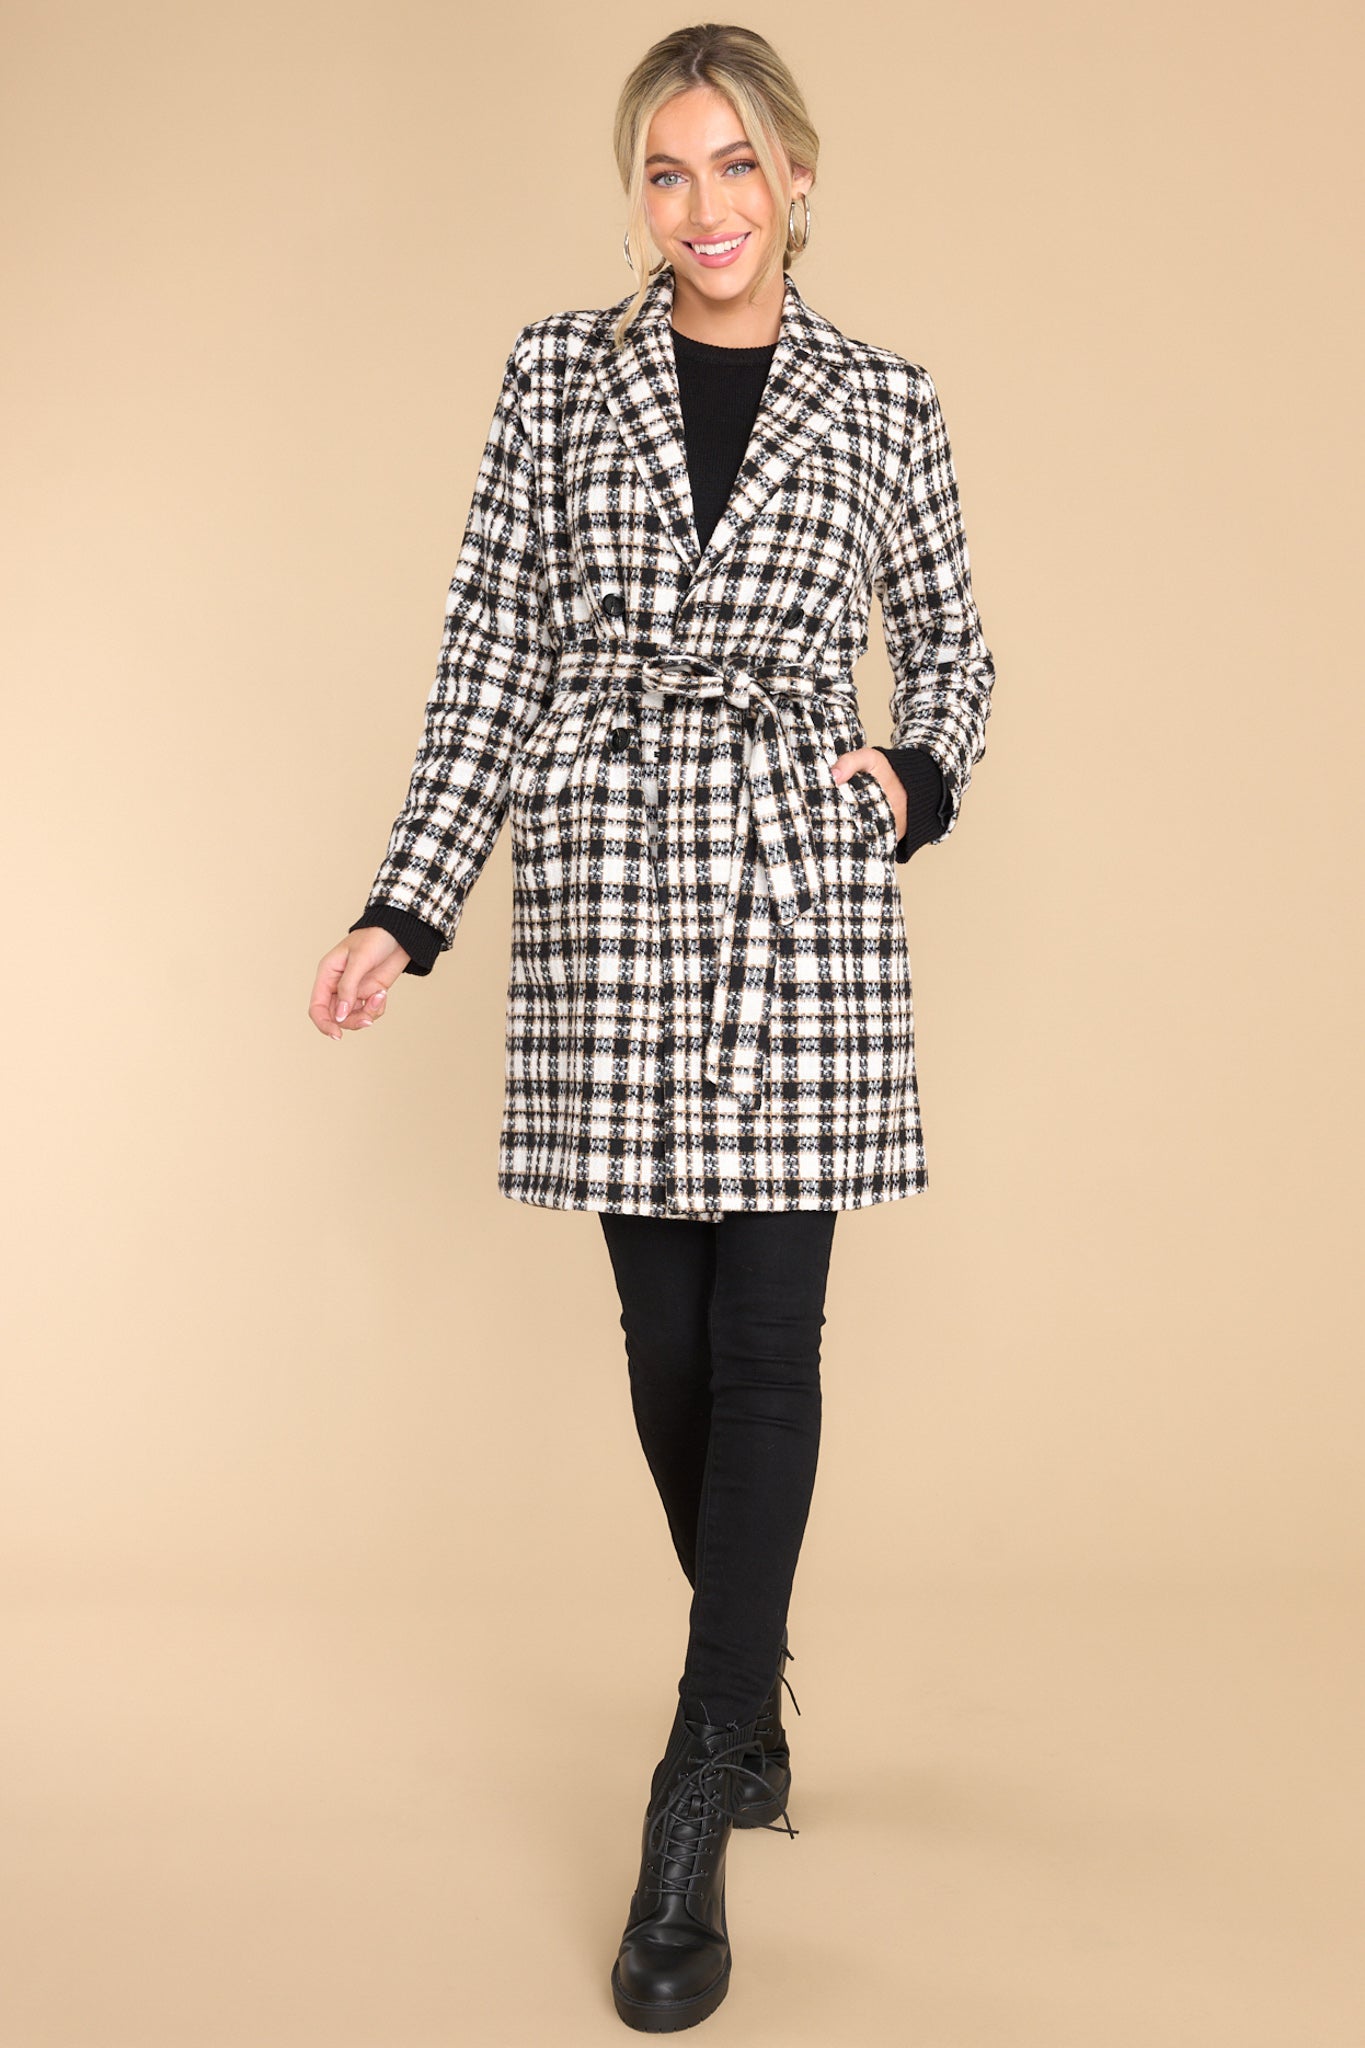 Classically Chic Black And White Plaid Coat - Red Dress